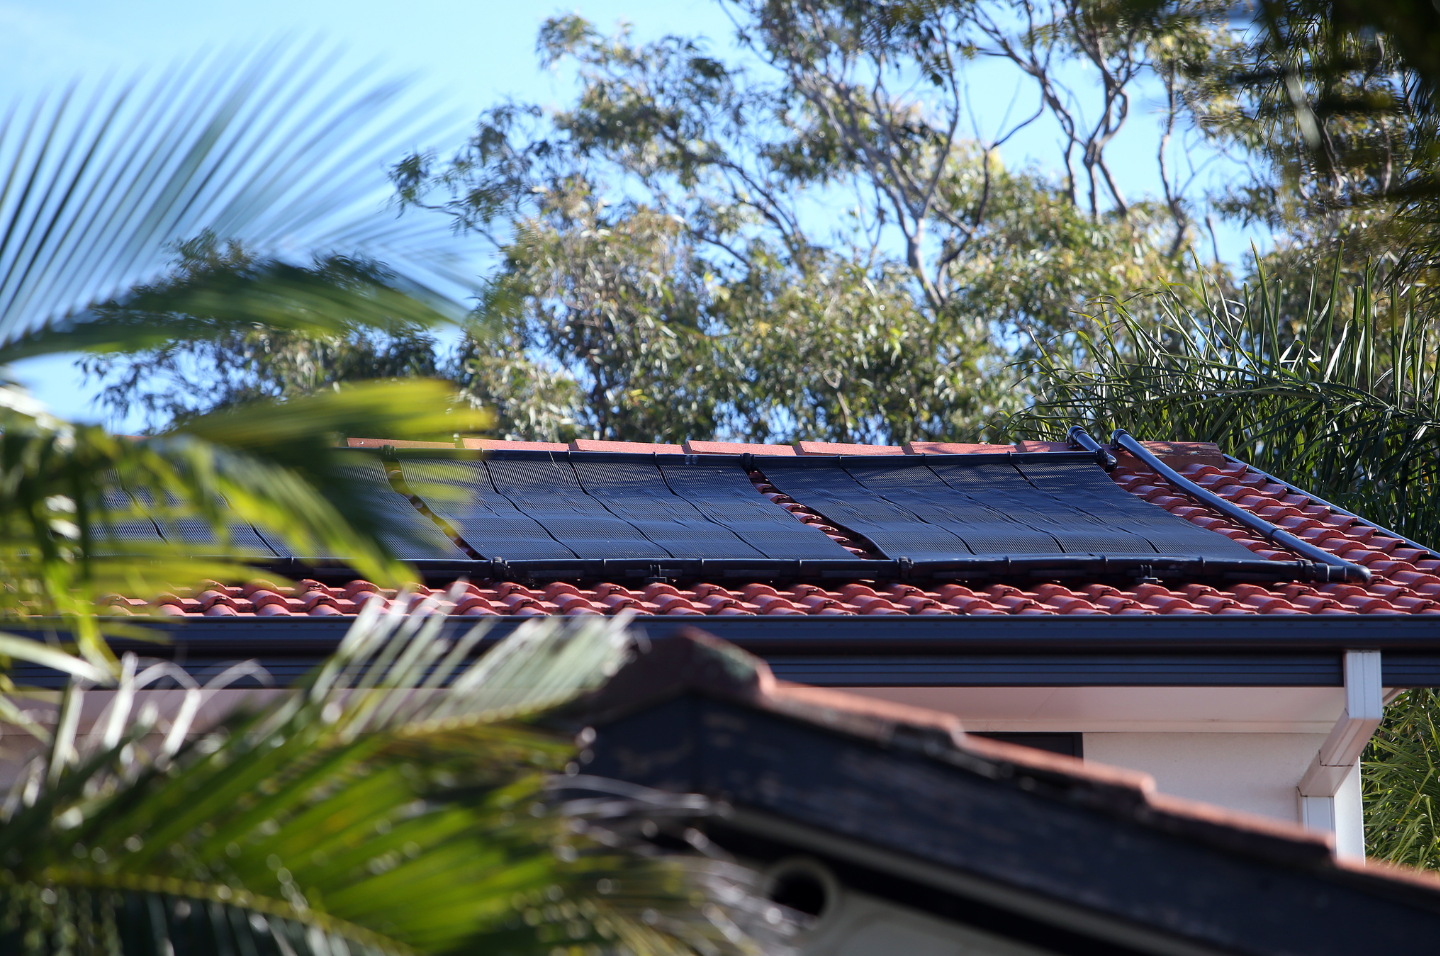 Solar panels on red roof